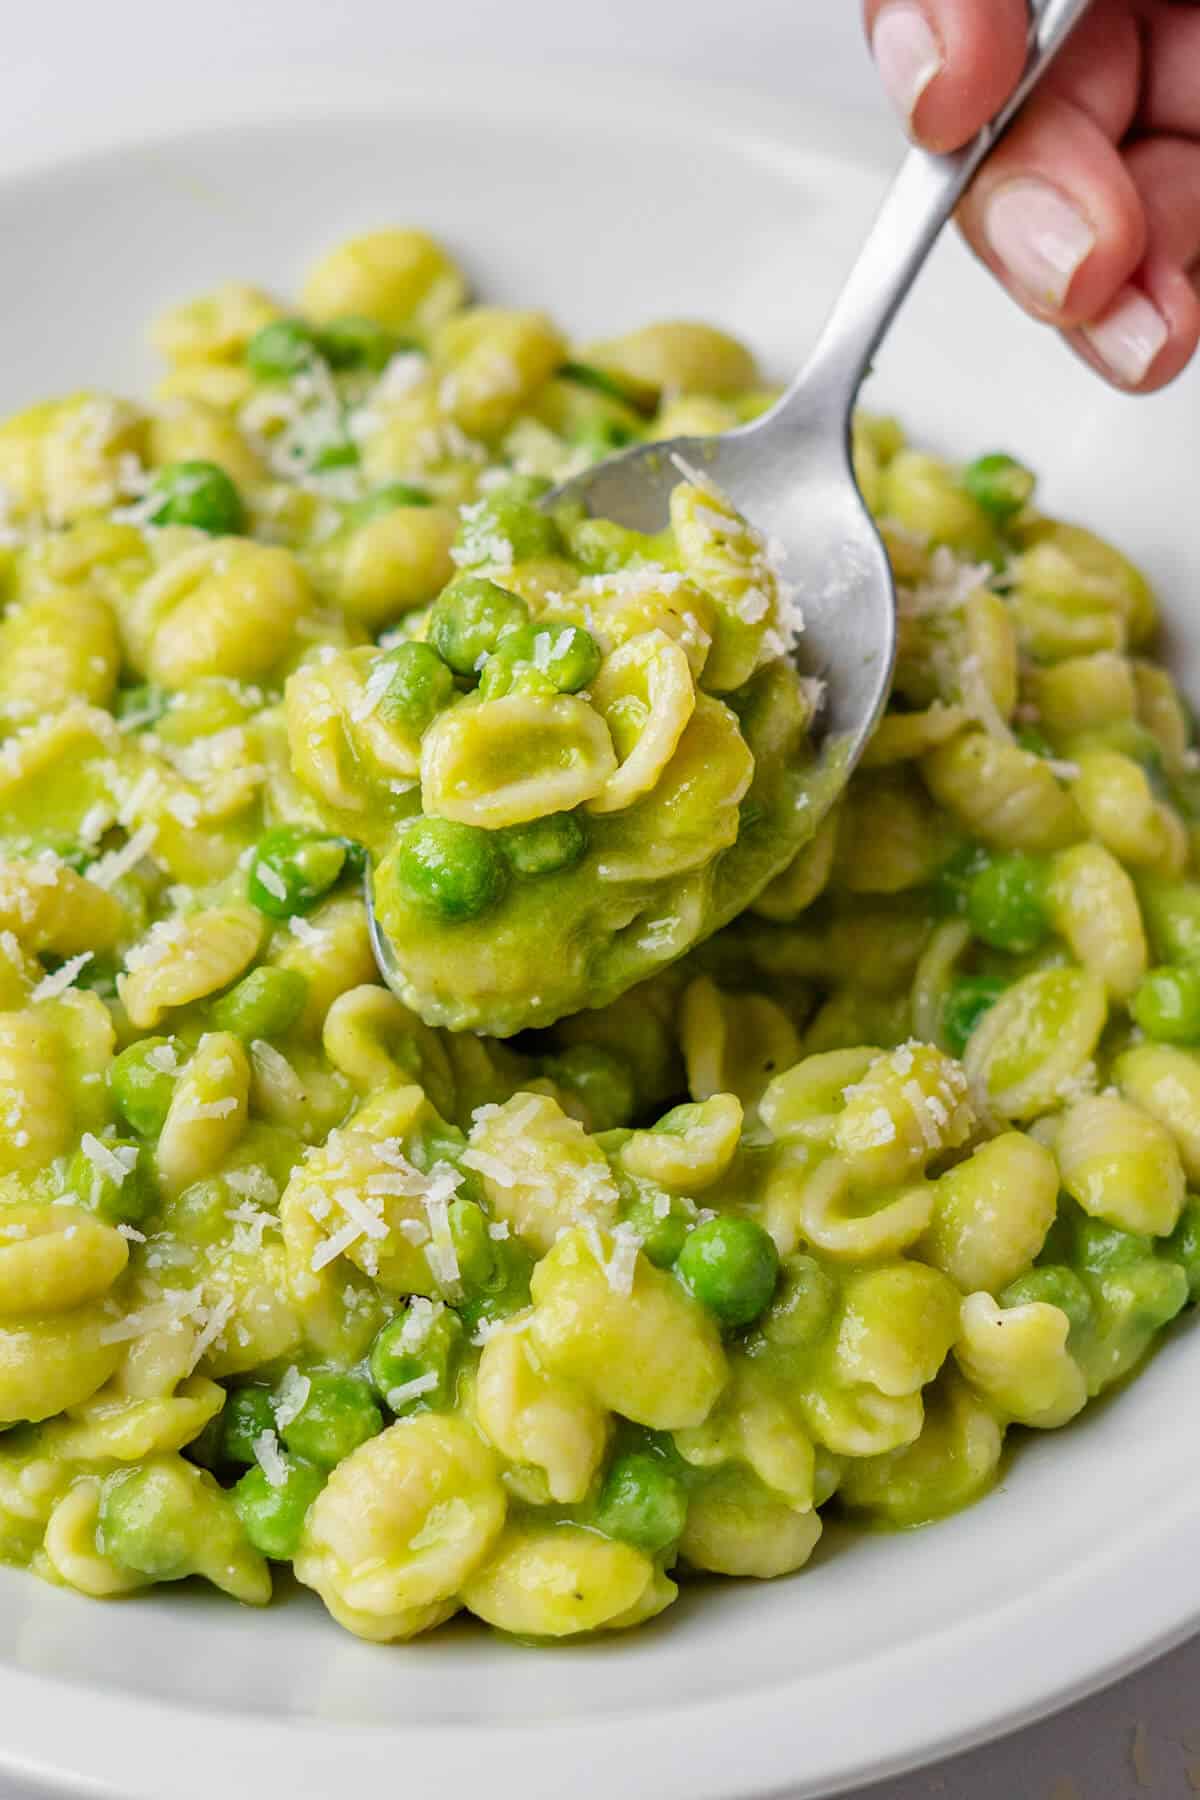 Spoon of pasta with peas coming out of a bowl